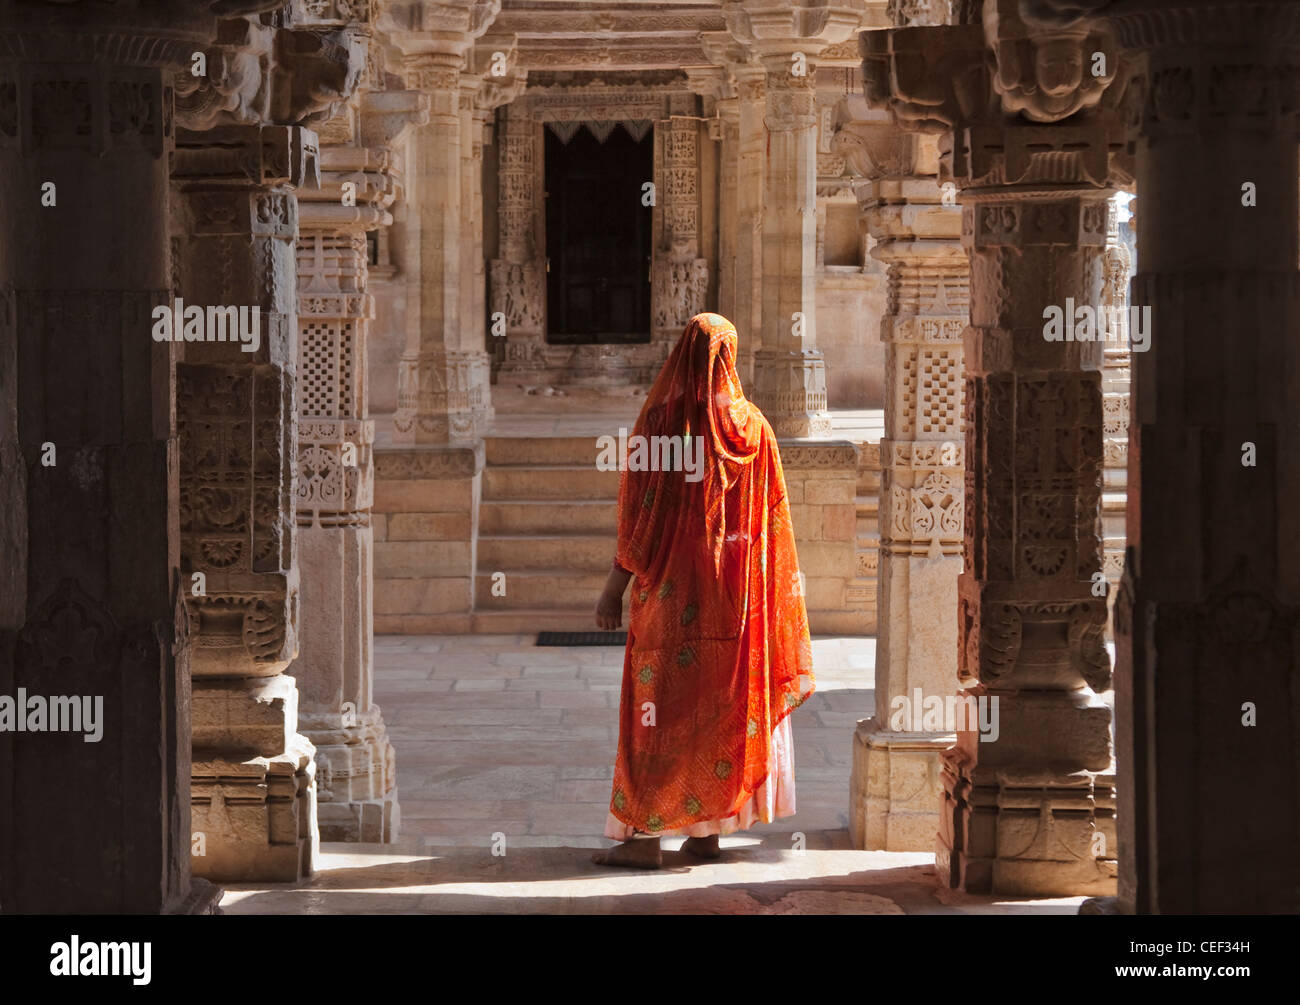 Woman in Jain Temple in Chittorgarh Fort, Rajasthan, India Stock Photo